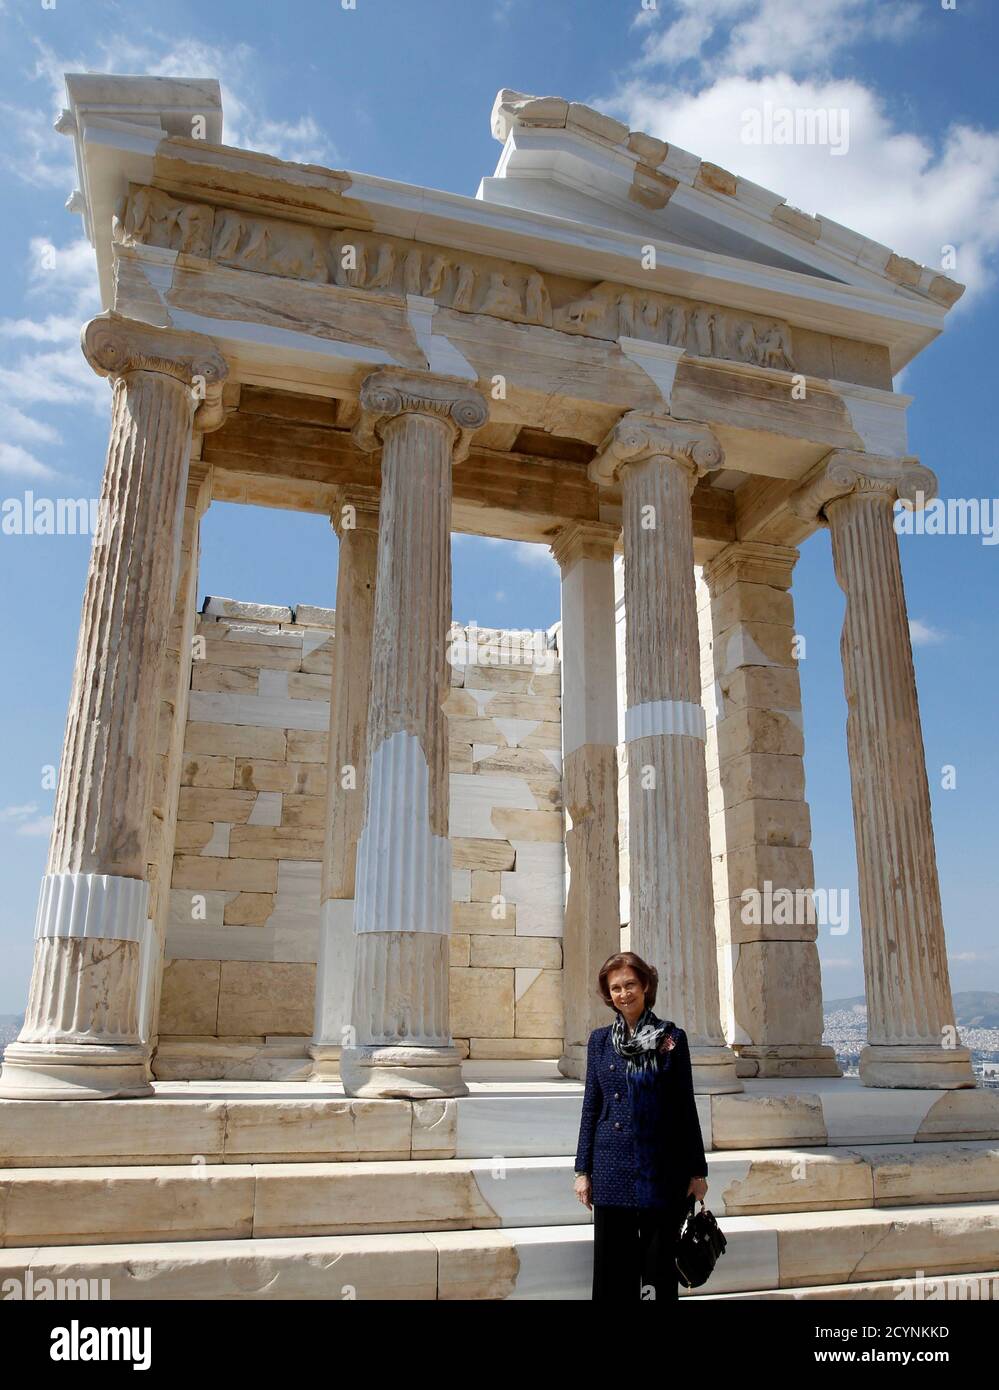 Queen Sofia of Spain poses in front of the temple of Athena Nike at the  Acropolis hill in Athens March 23, 2011. REUTERS/Yiorgos Karahalis (GREECE  - Tags: SOCIETY POLITICS ROYALS Stock Photo - Alamy